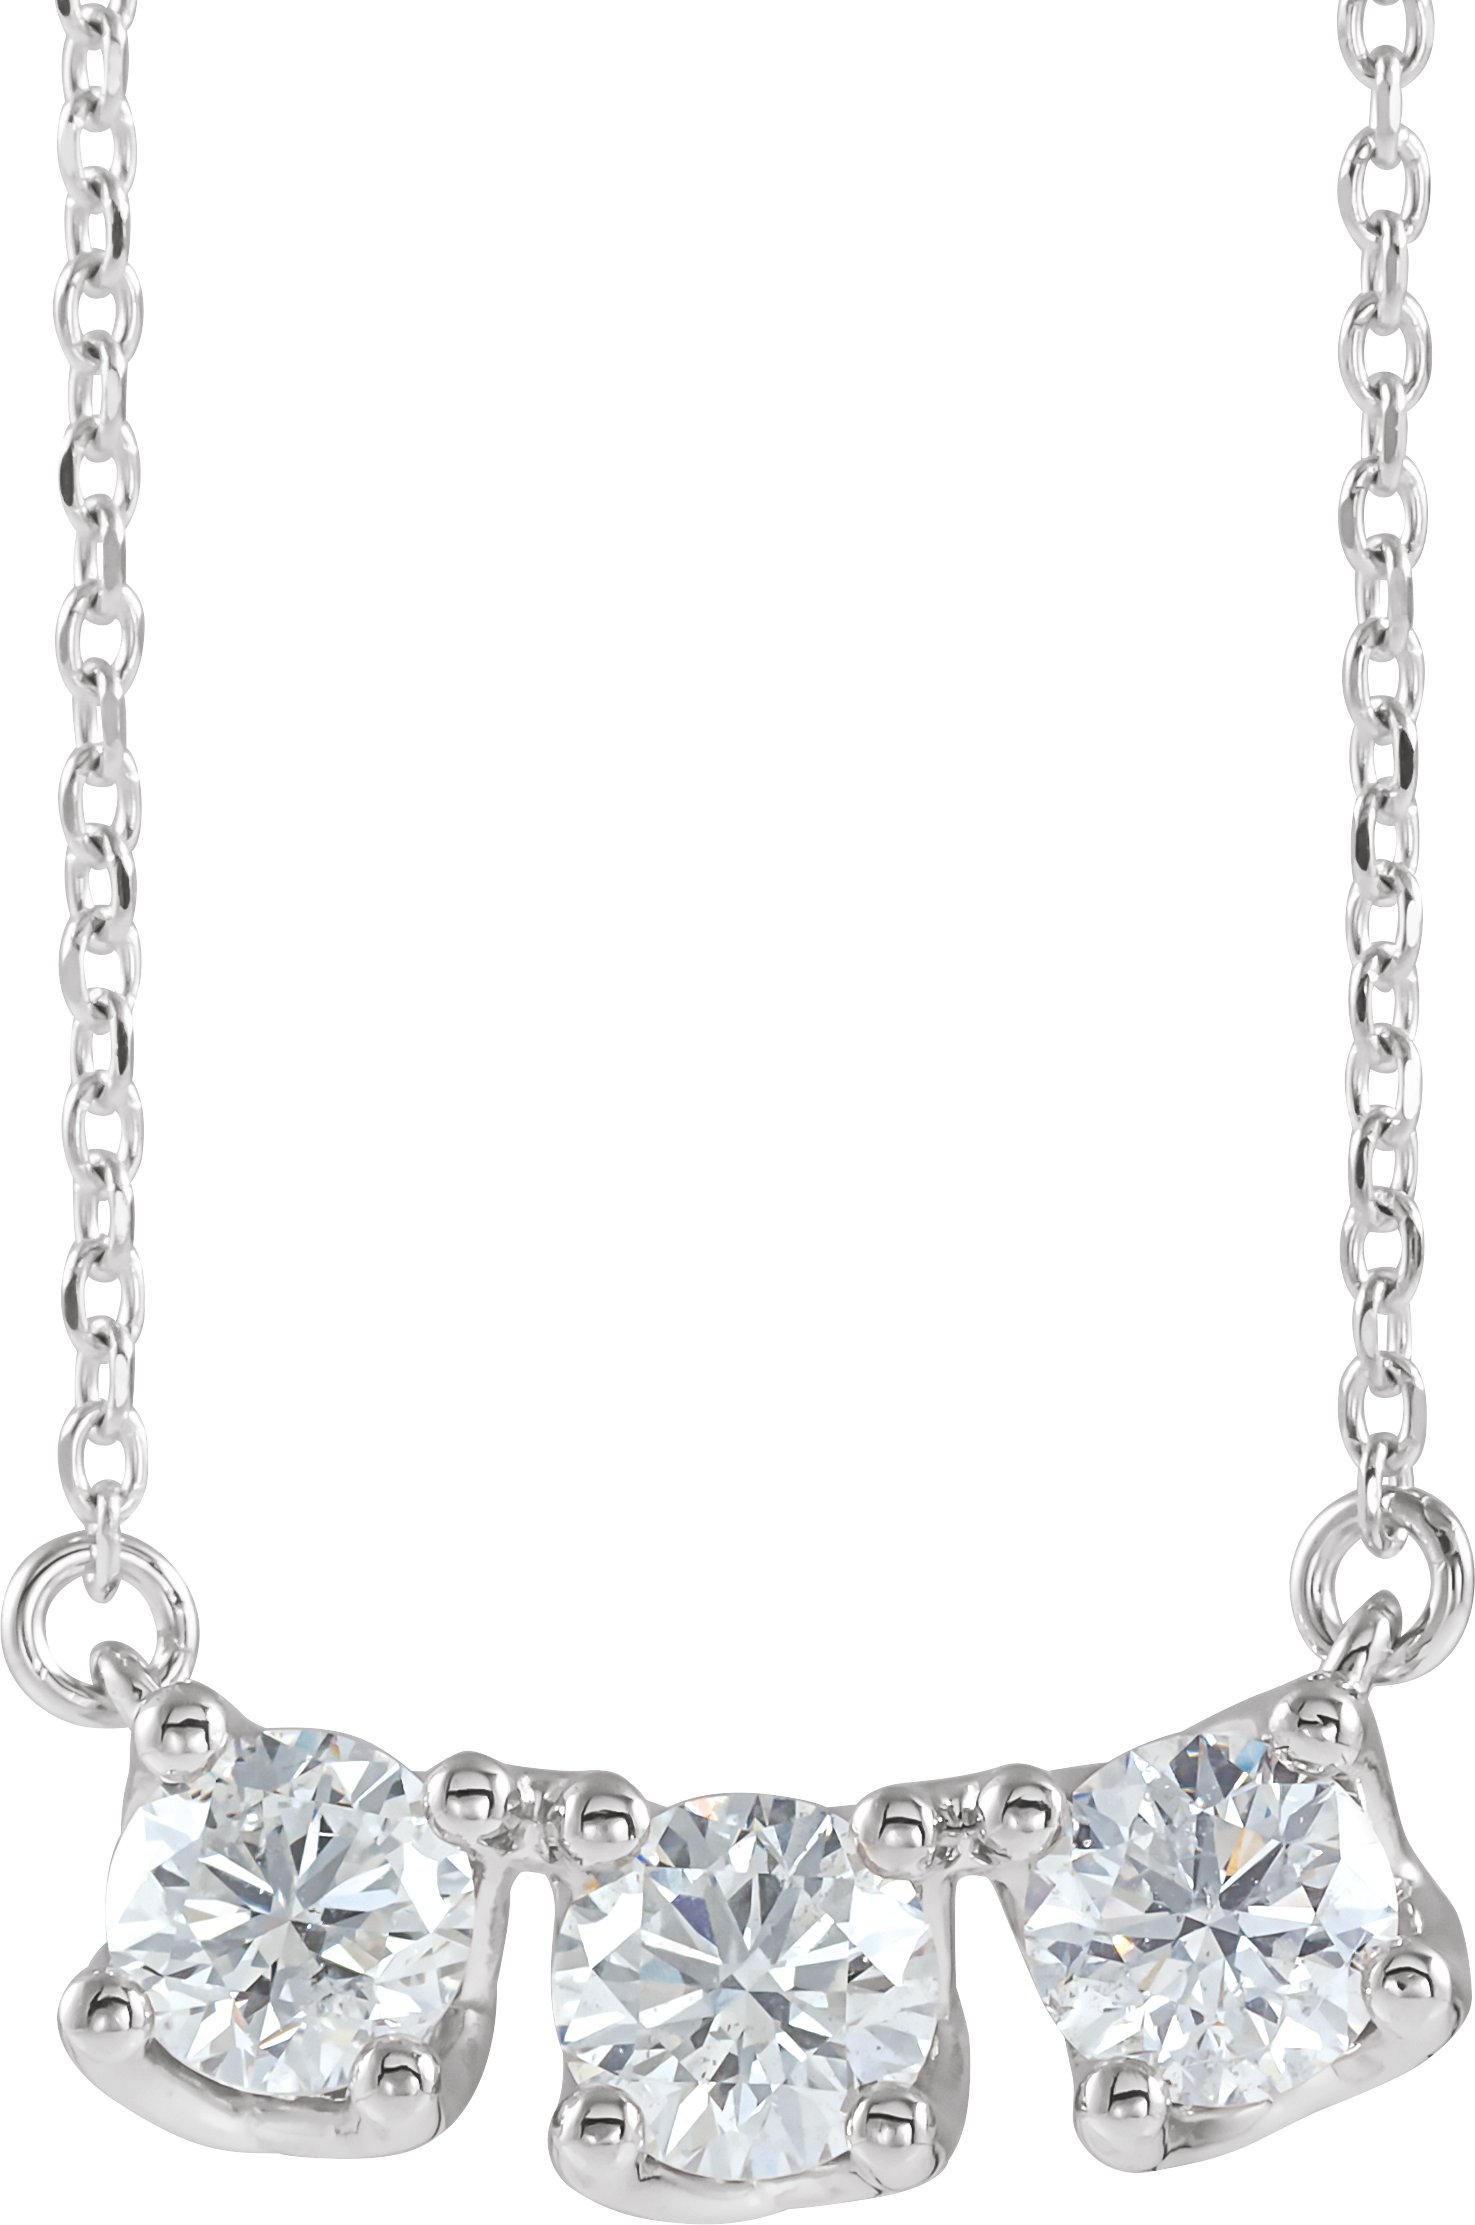 Sterling Silver 1 CTW Diamond Three Stone Curved Bar 16 inch Necklace Ref. 15022927